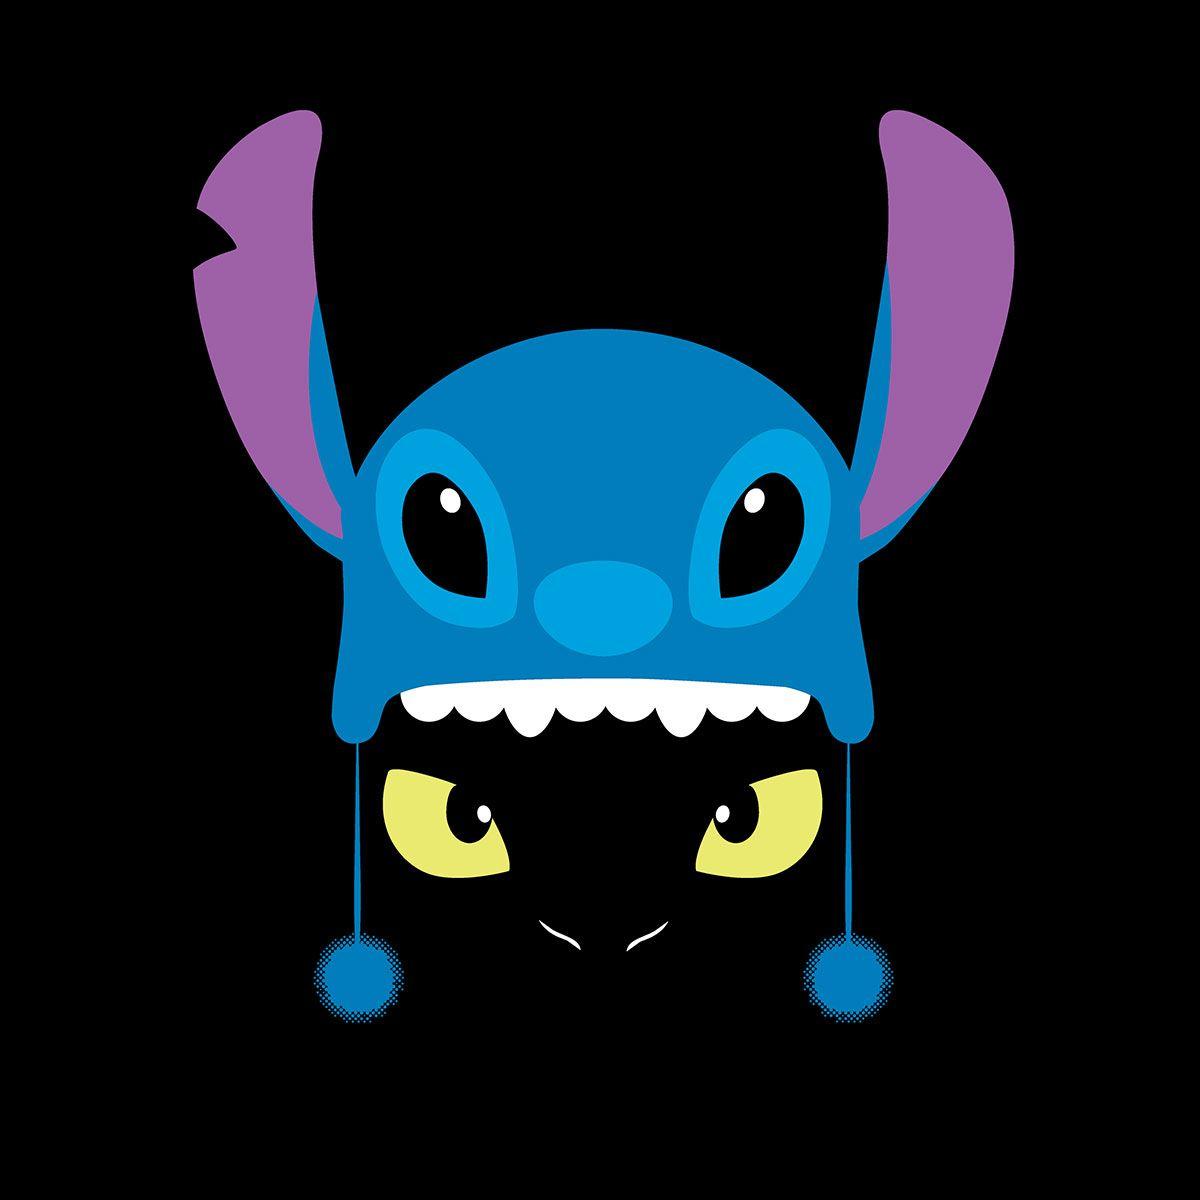 Pikachu Profile Pic Stitch Toothless Wallpapers Cute Pikachu Daily | My ...